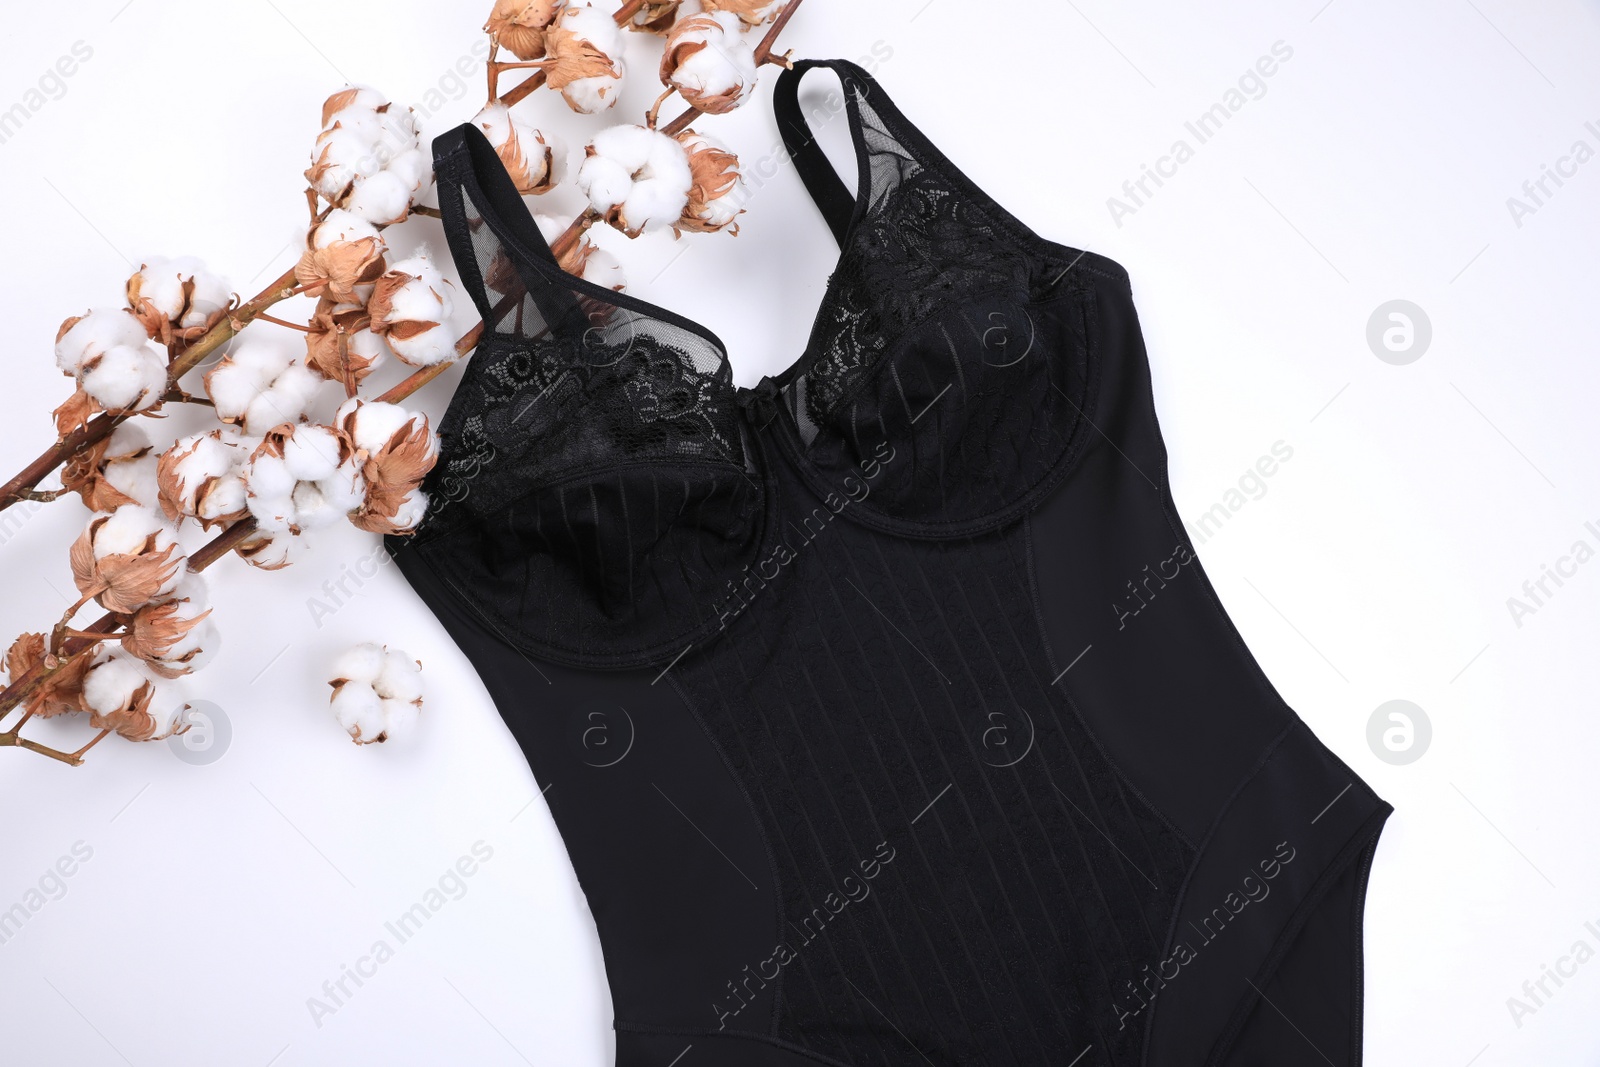 Photo of Elegant plus size black women's underwear and cotton flowers on white background, top view